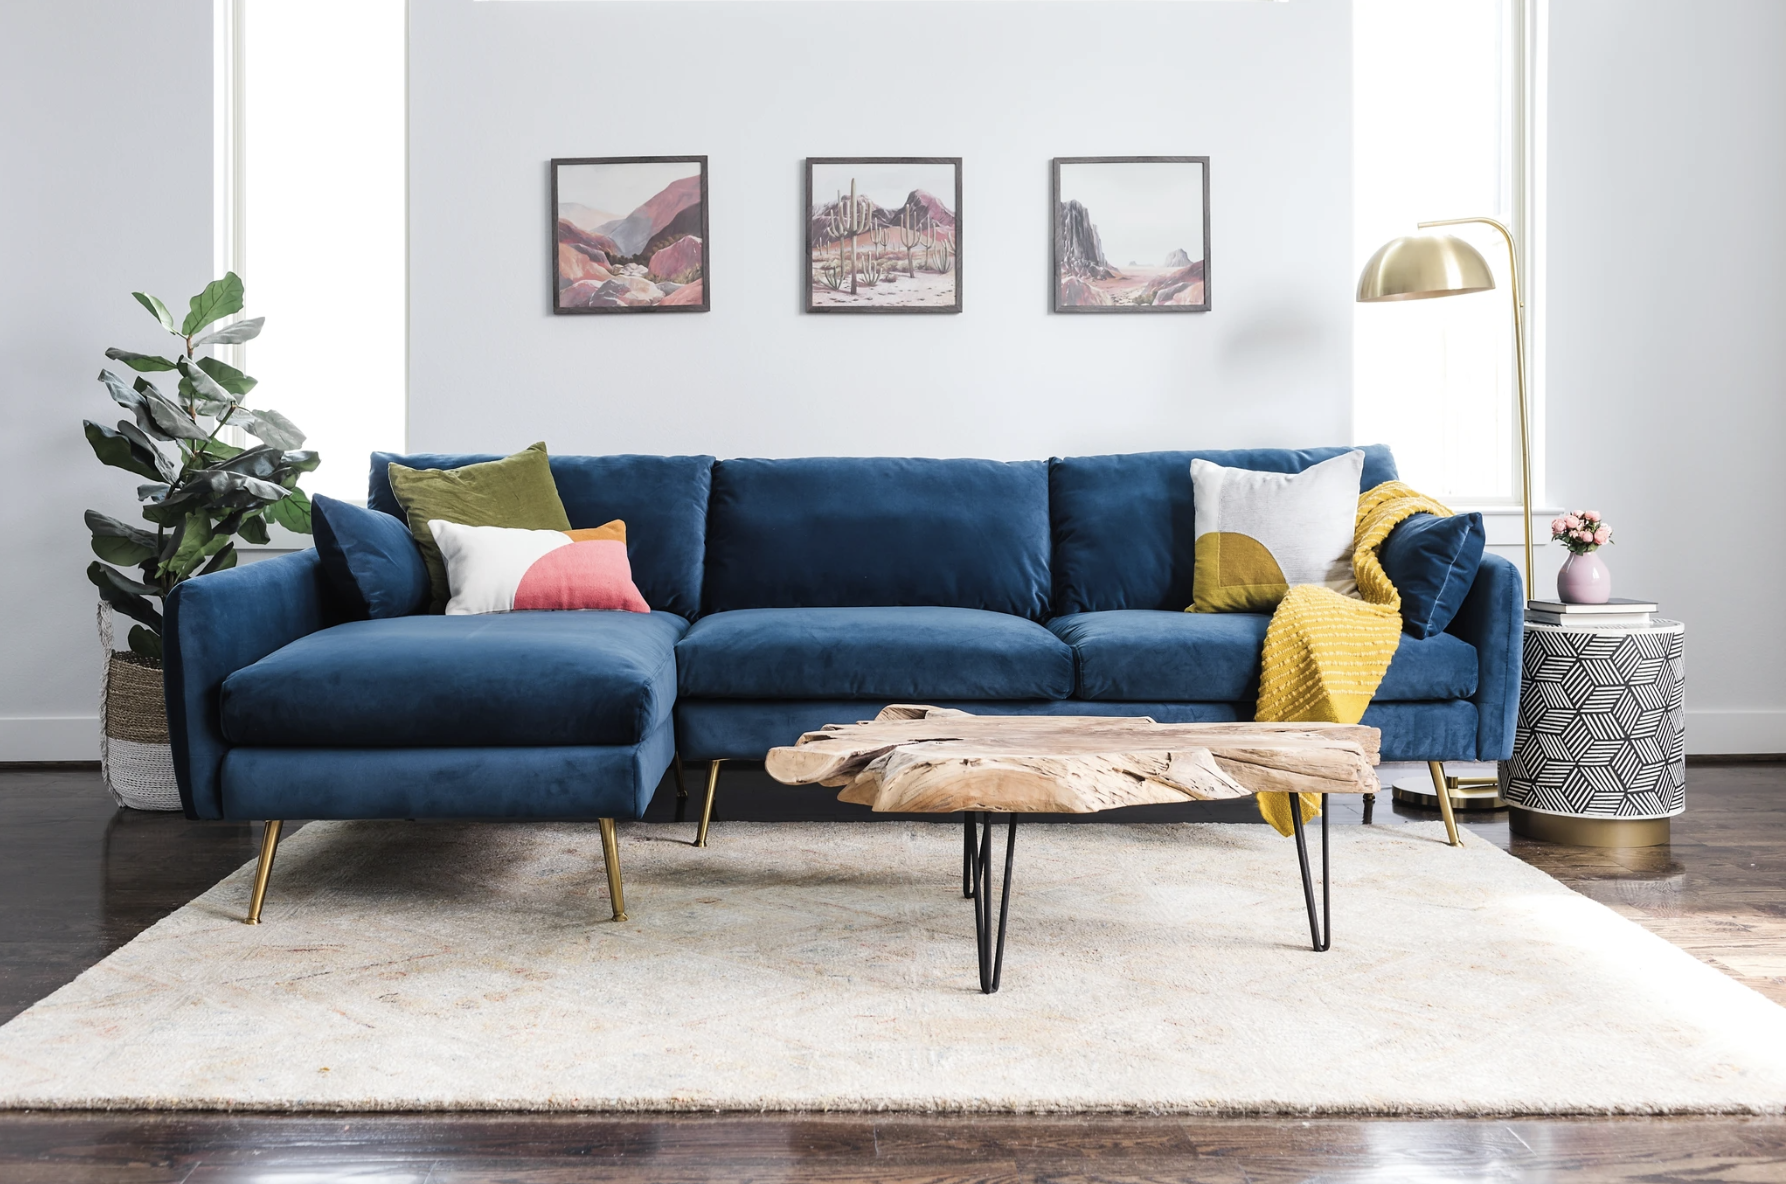 A stylish living room with a blue sectional sofa, various cushions, a unique wooden coffee table, and decorative plants. No people are visible